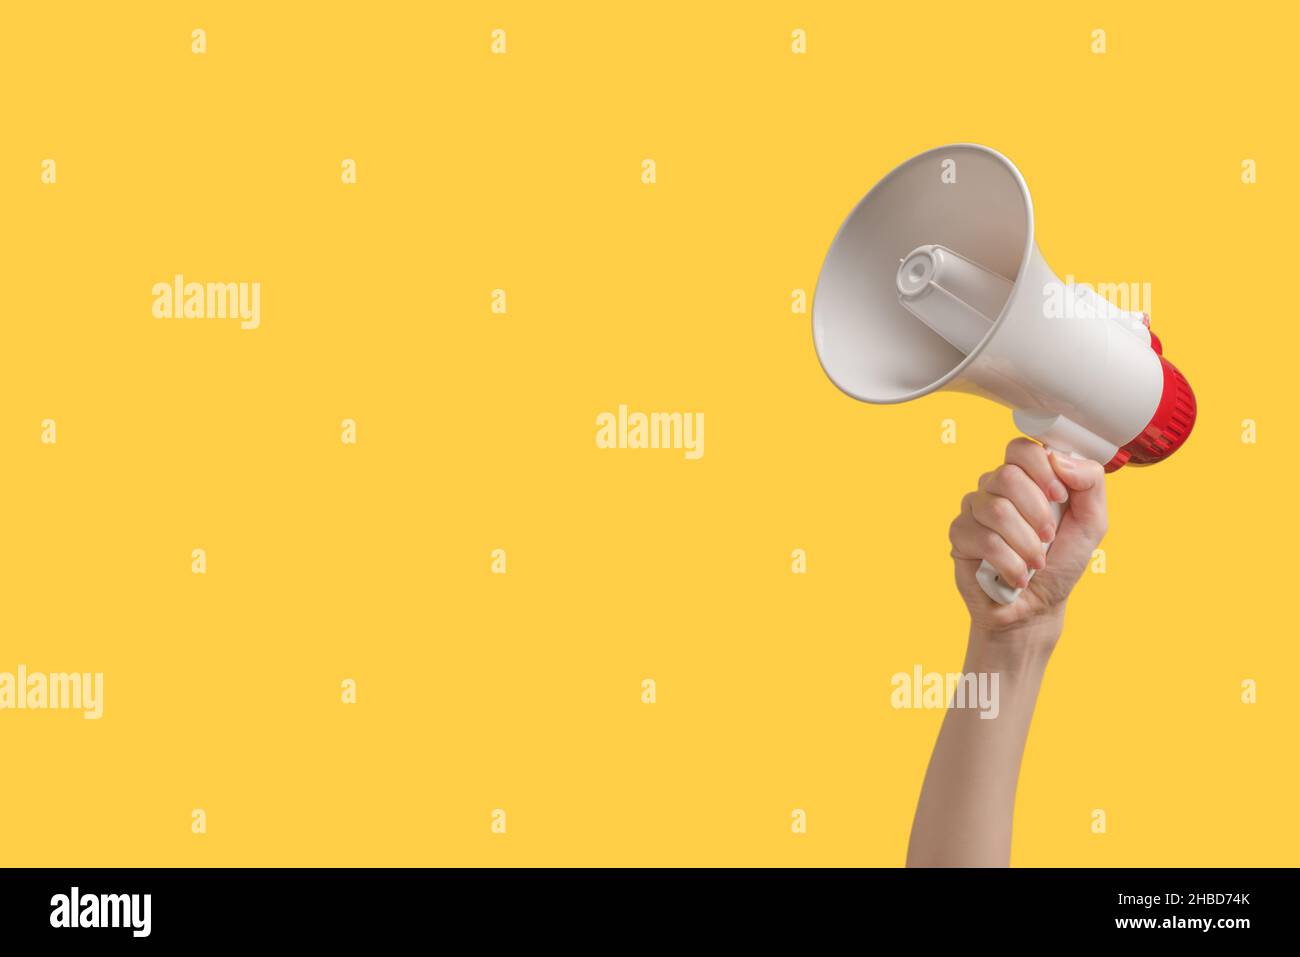 Megaphone in woman hands on a yellow background.  Copy space. Stock Photo